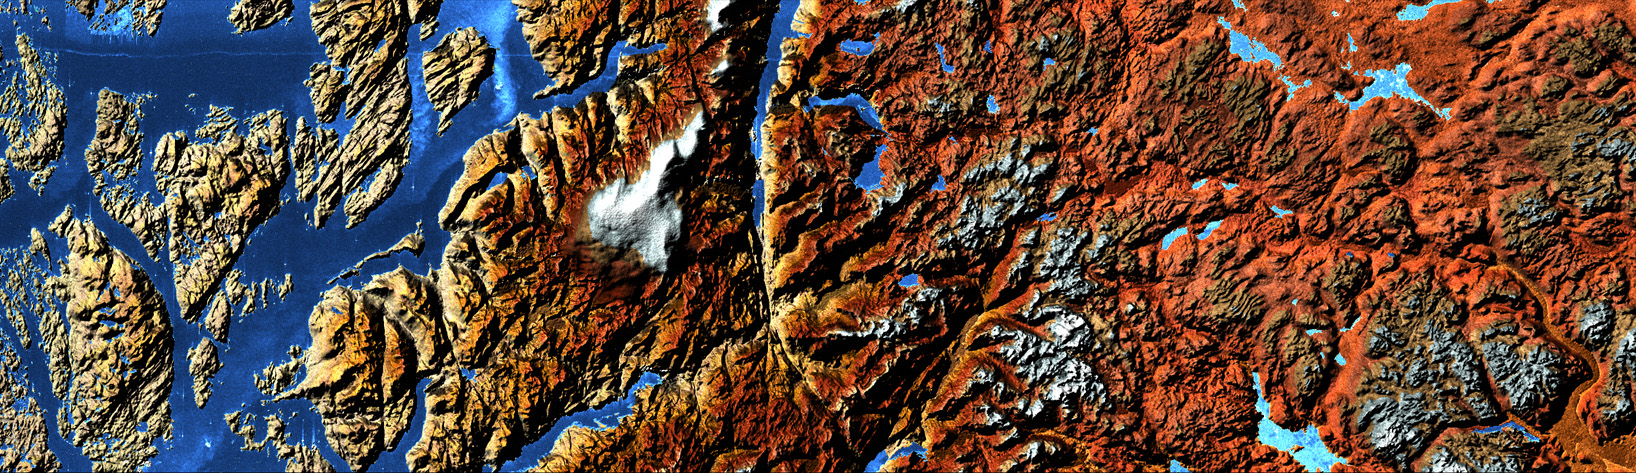 Hardangerfjord, Norway - related image preview